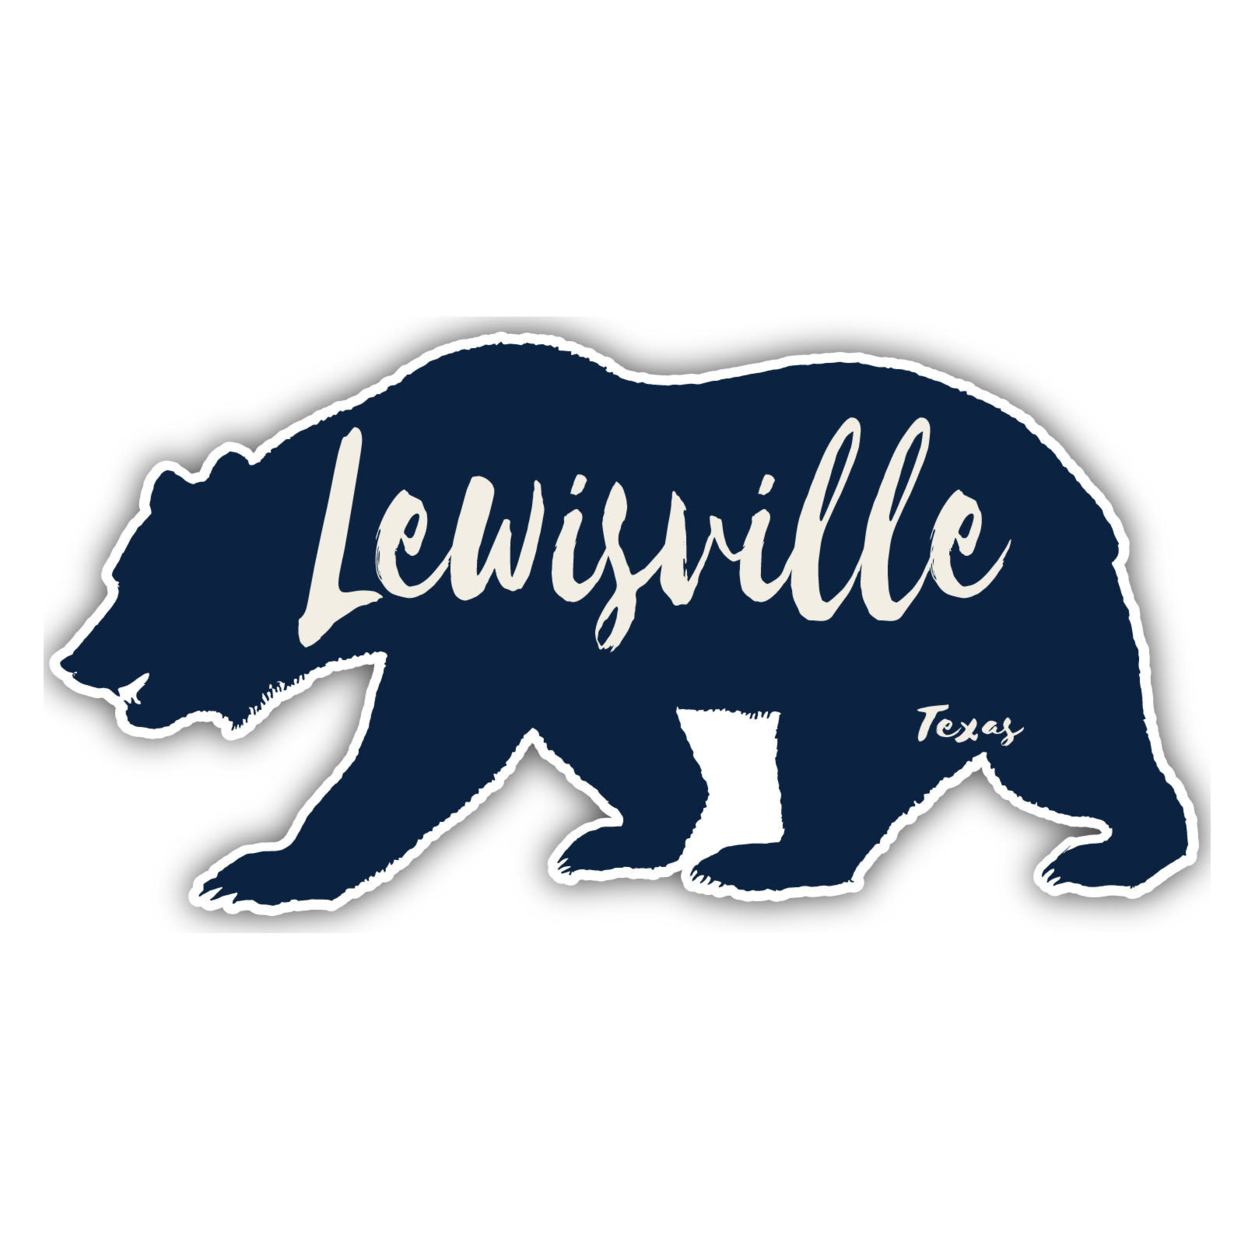 Lewisville Texas Souvenir Decorative Stickers (Choose Theme And Size) - 4-Inch, Great Outdoors